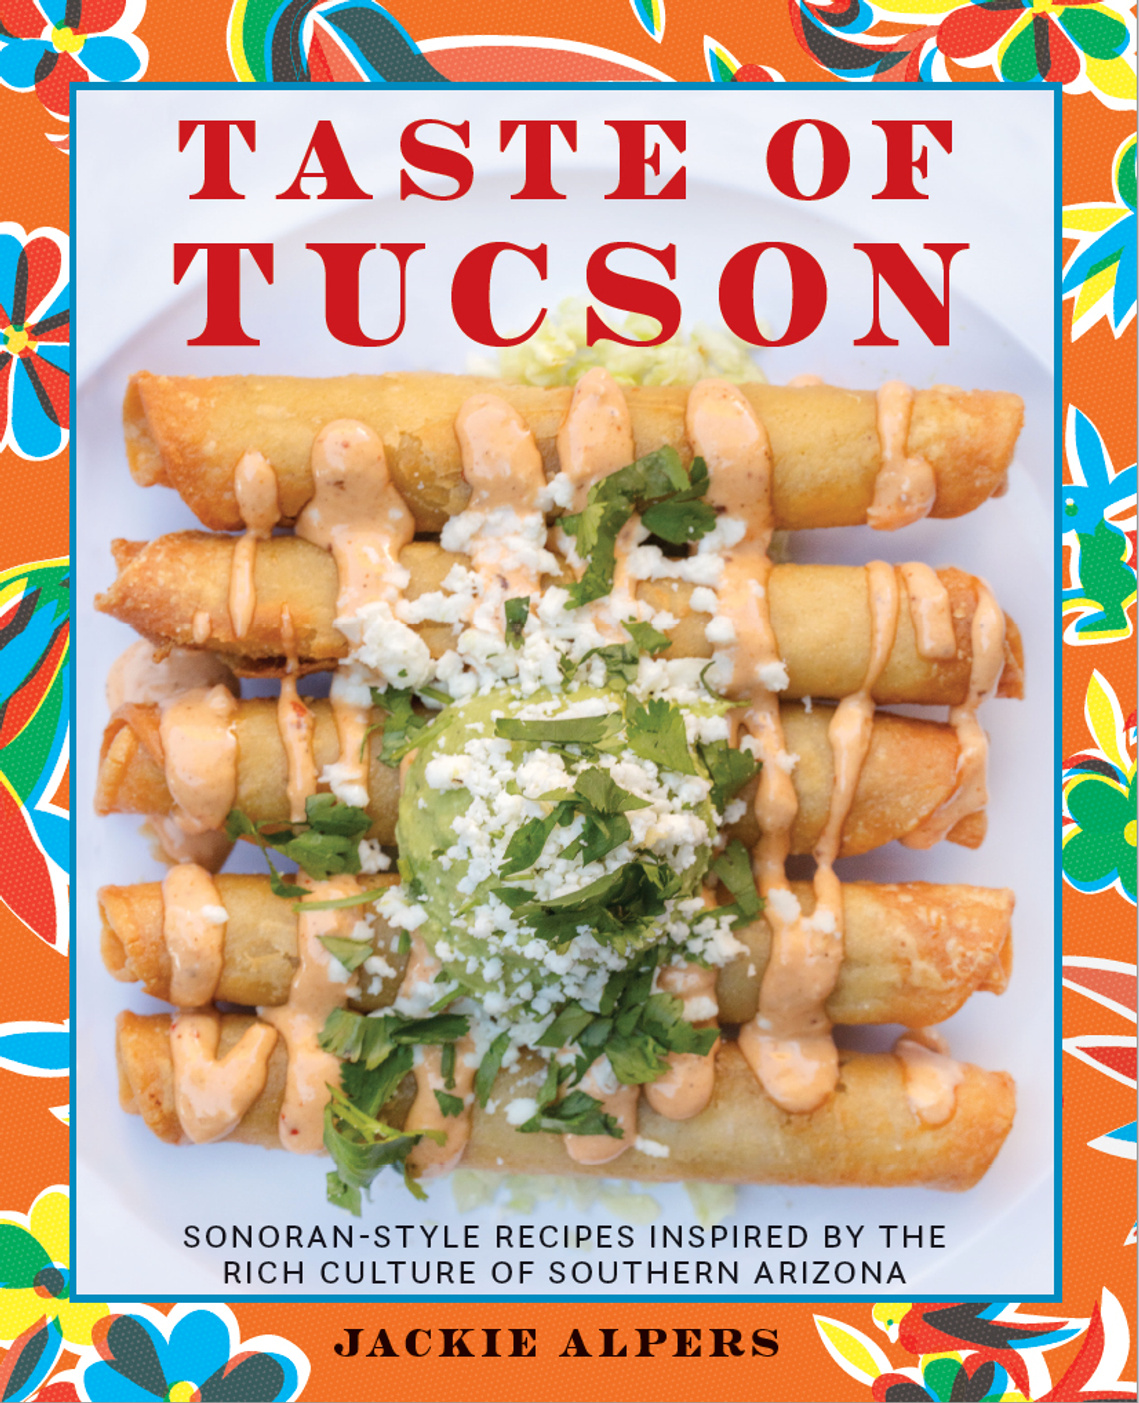 The Taste of Tucson cookbook by Sonoran food expert and food photographer Jackie Alpers. Recipes from Tucson, Arizona. 